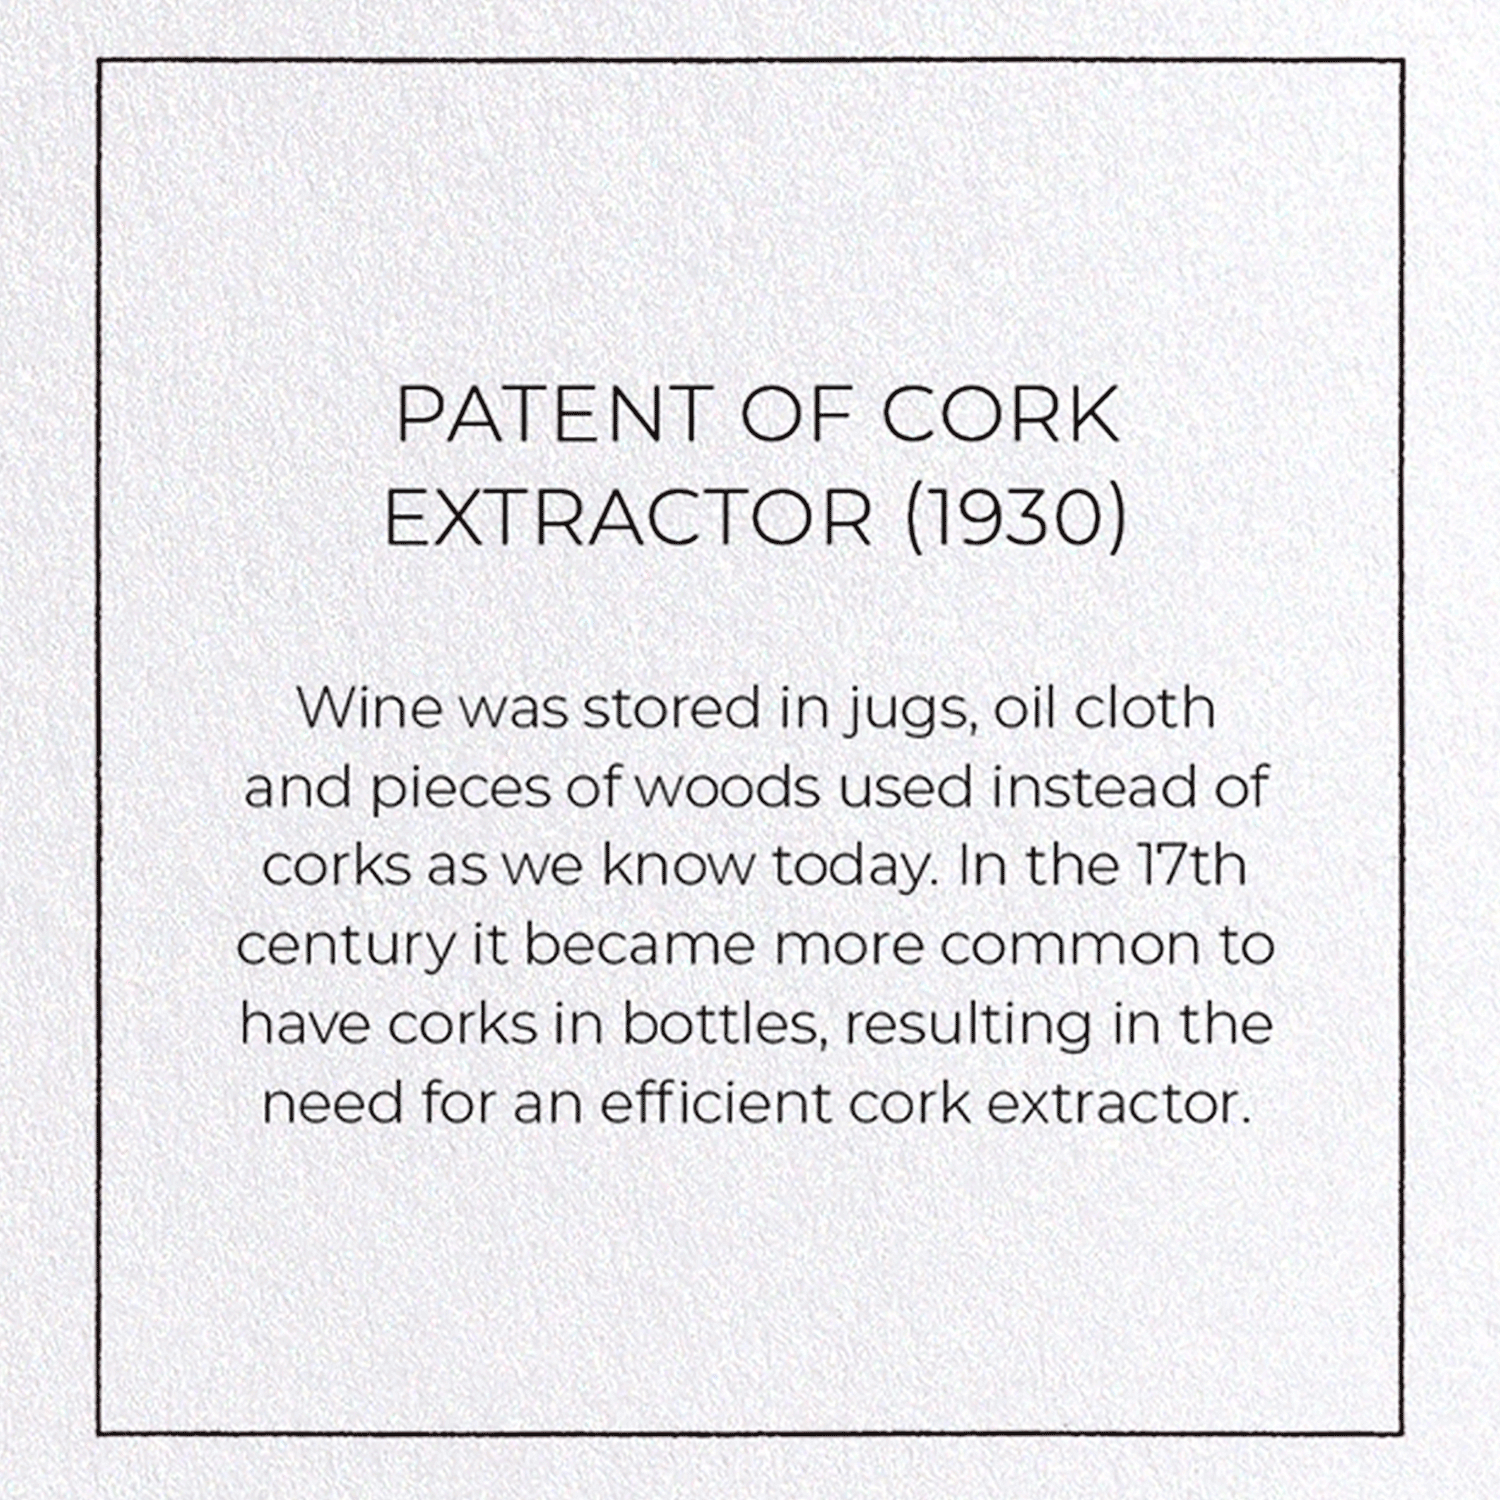 PATENT OF CORK EXTRACTOR (1930): Patent Greeting Card